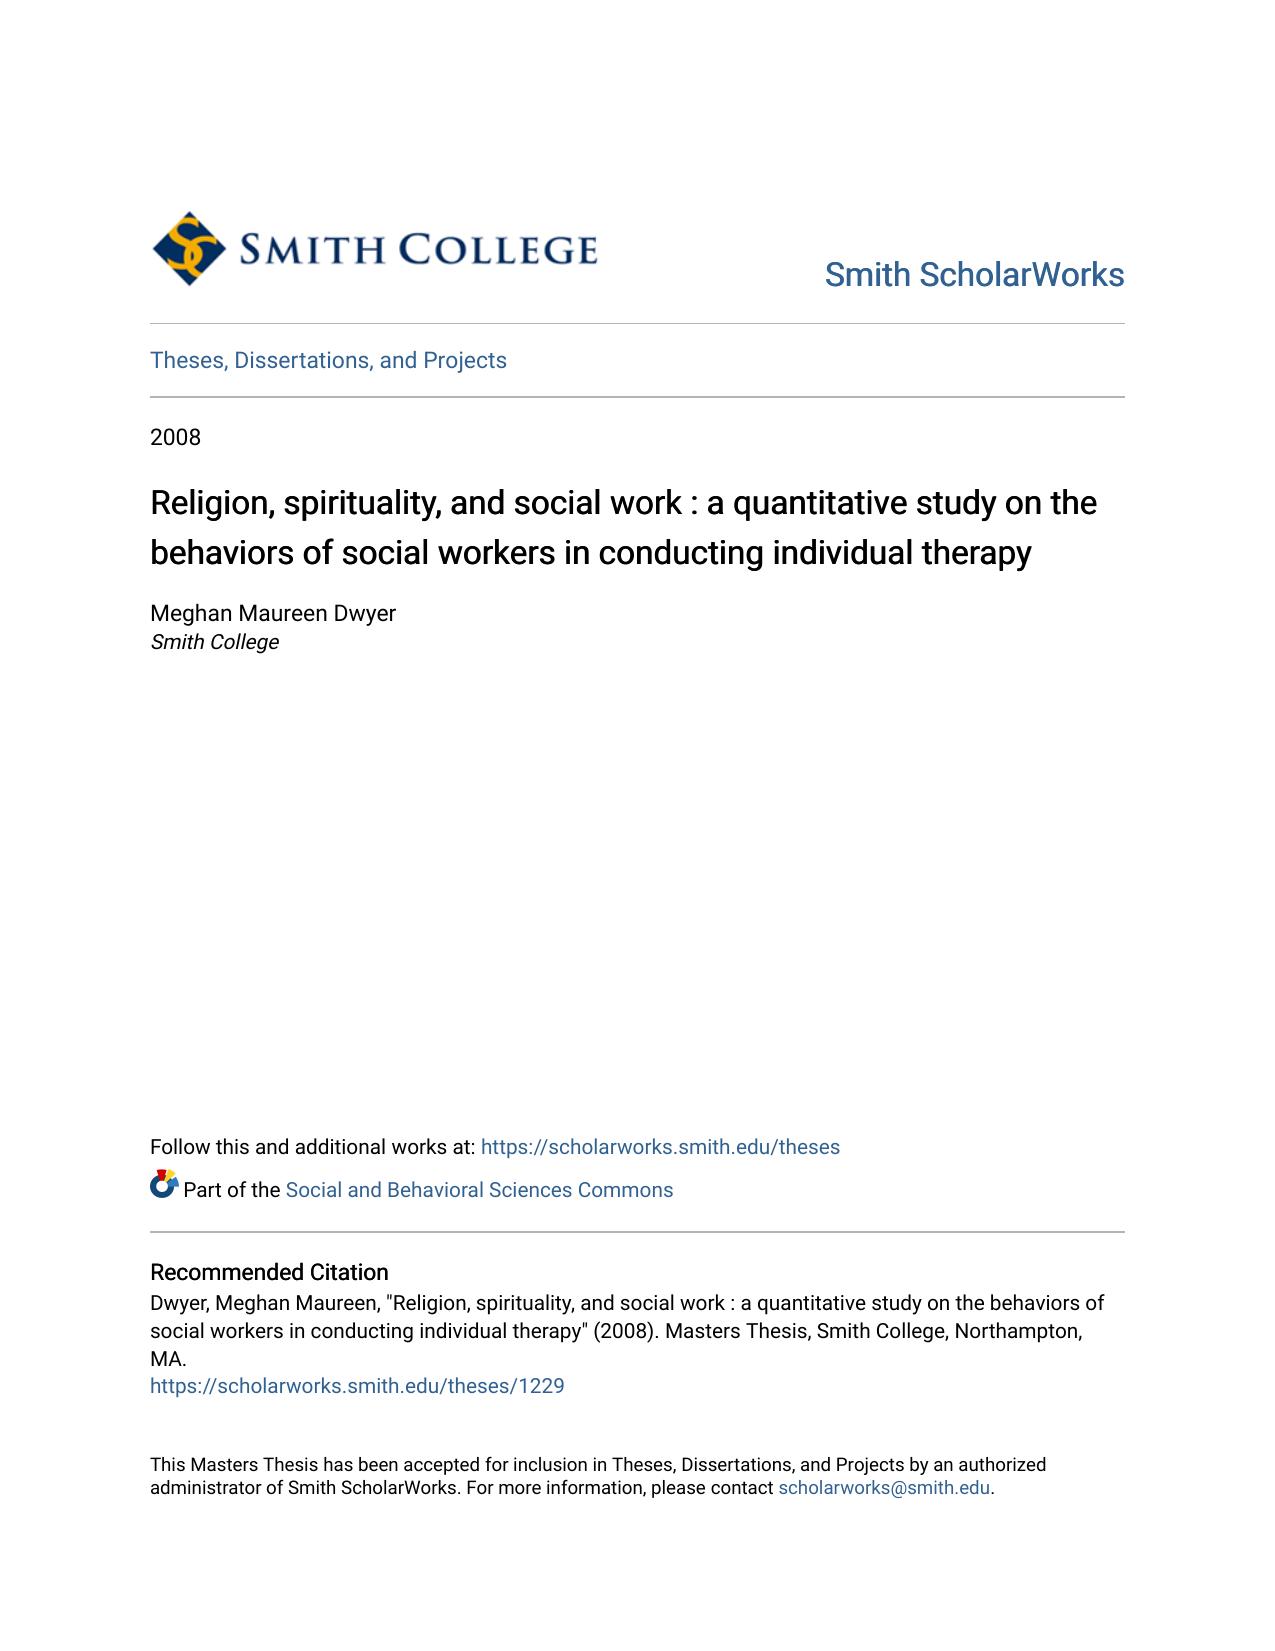 Religion, spirituality, and social work : a quantitative study on the behaviors of social workers in conducting individual therapy